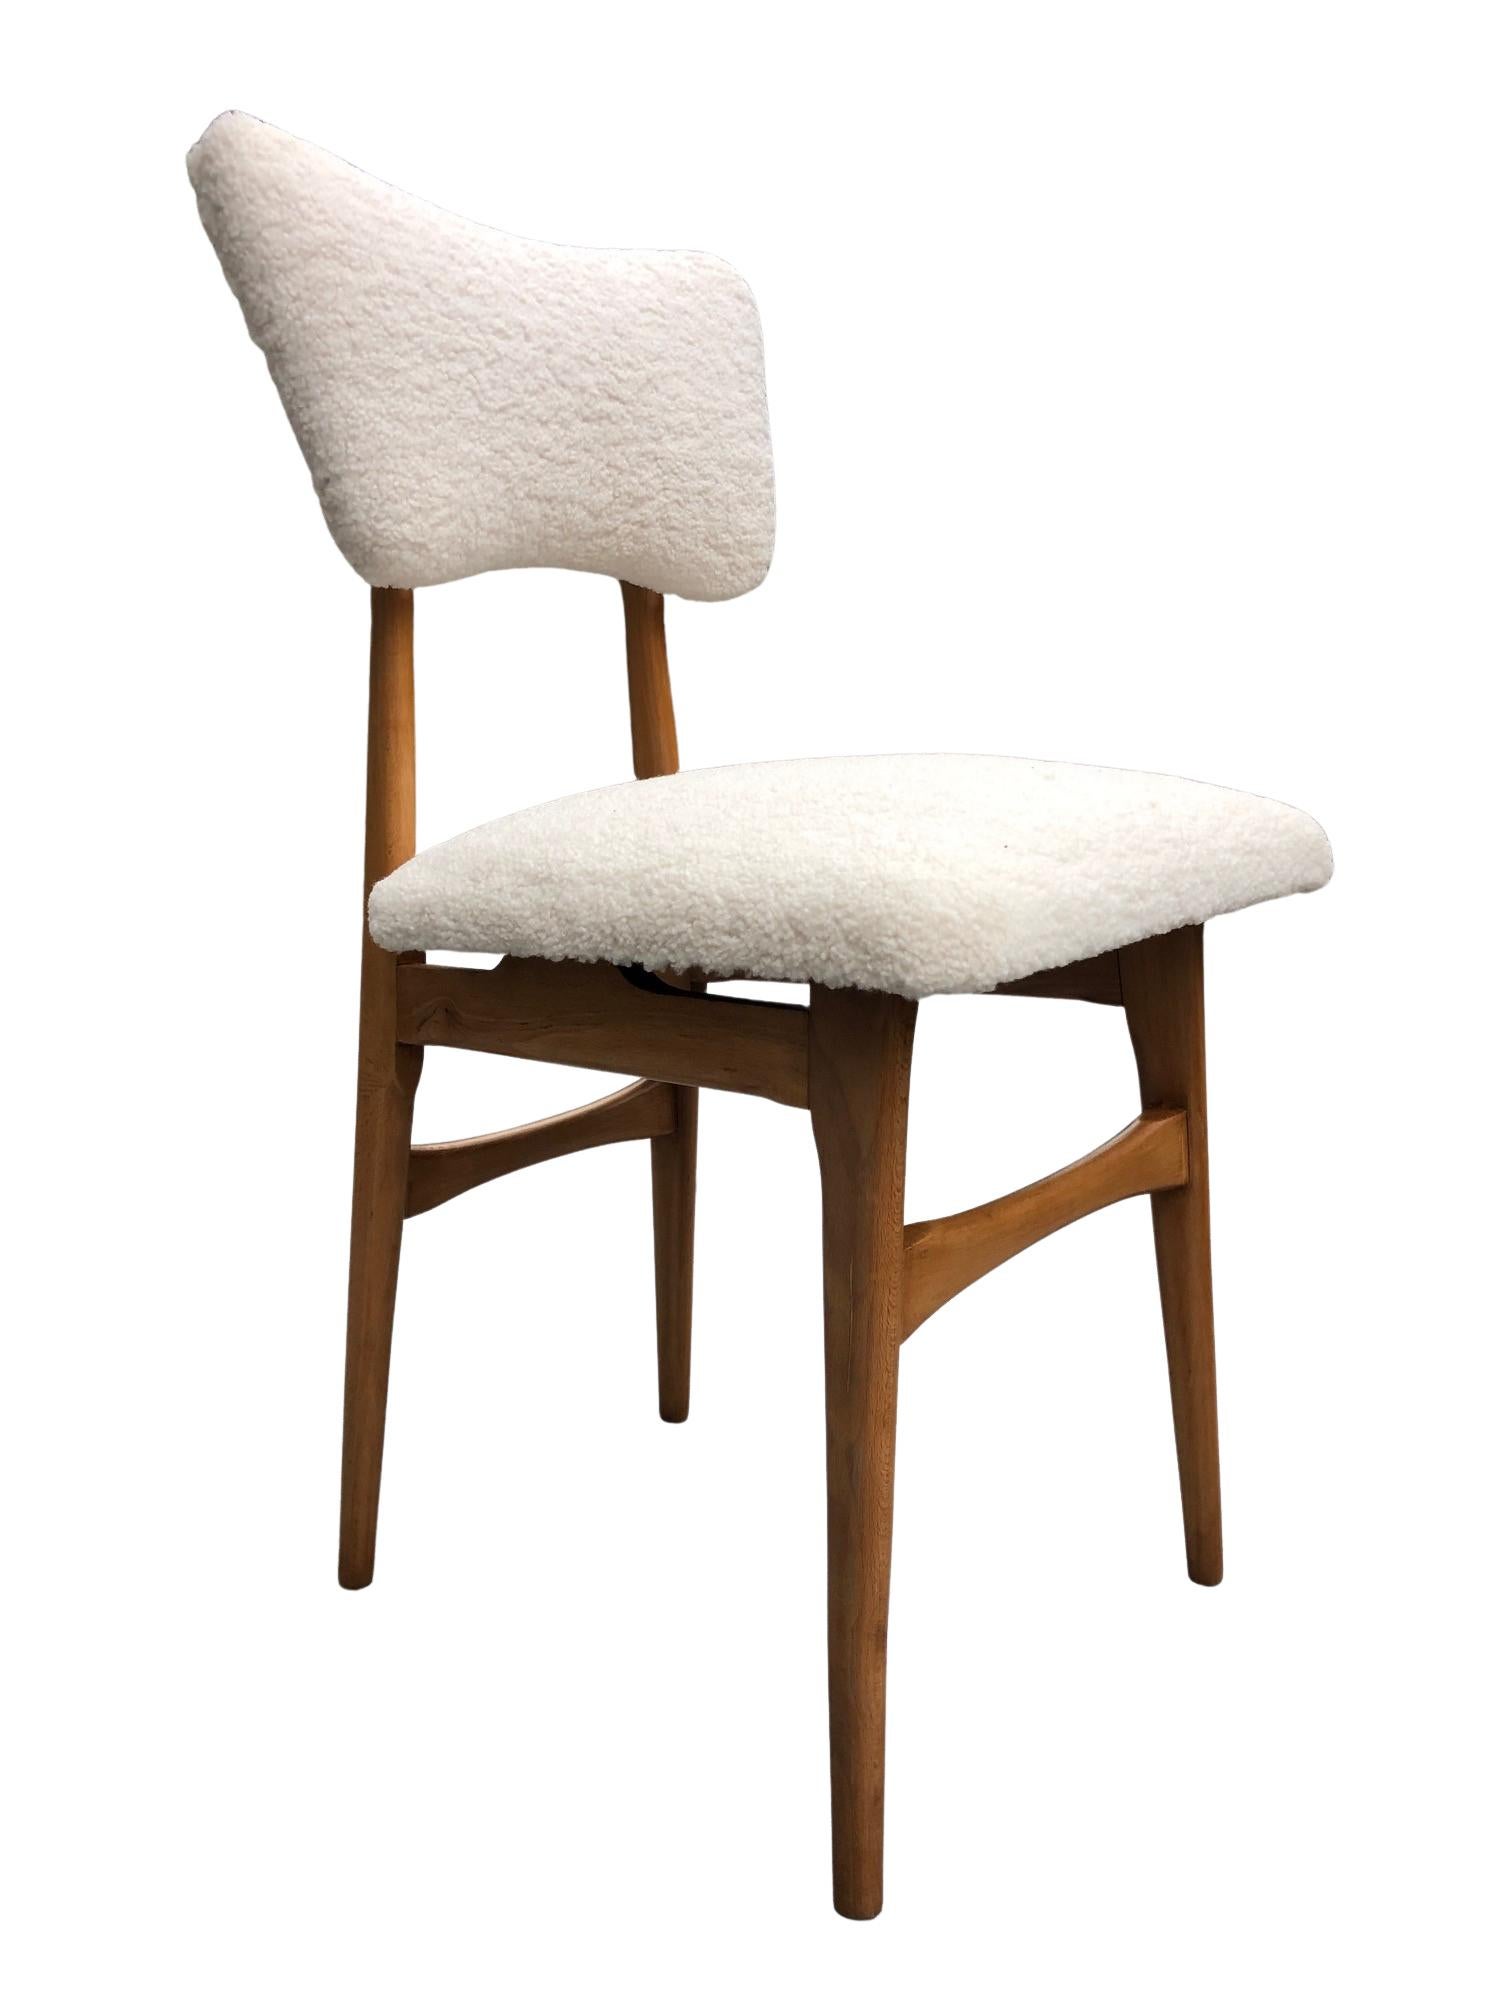 Midcentury Cream Bouclé and Wood Dining Chairs, Europe, 1960s, Set of Four For Sale 8